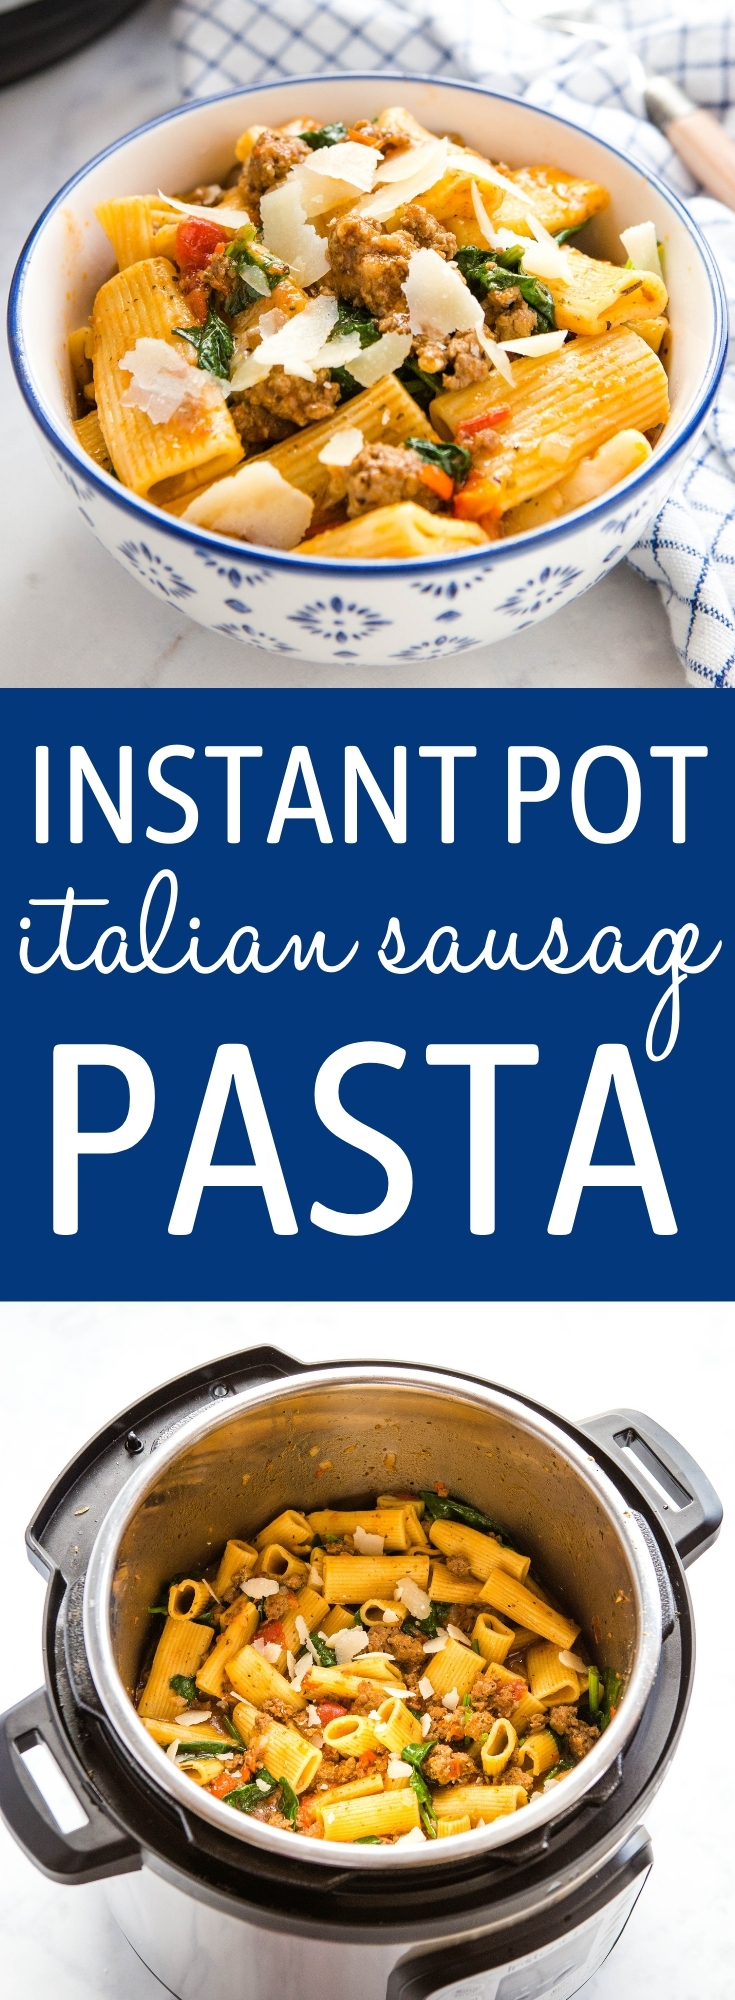 This Instant Pot Sausage Pasta is the perfect easy one-pot meal that's packed with classic Italian flavours and on the table in 25 minutes or less! Recipe from thebusybaker.ca! #sausagepasta #italian #instantpot #onepotpasta #spinach #veggies #healthy #meal #familymeal #easyrecipe #easymeal via @busybakerblog